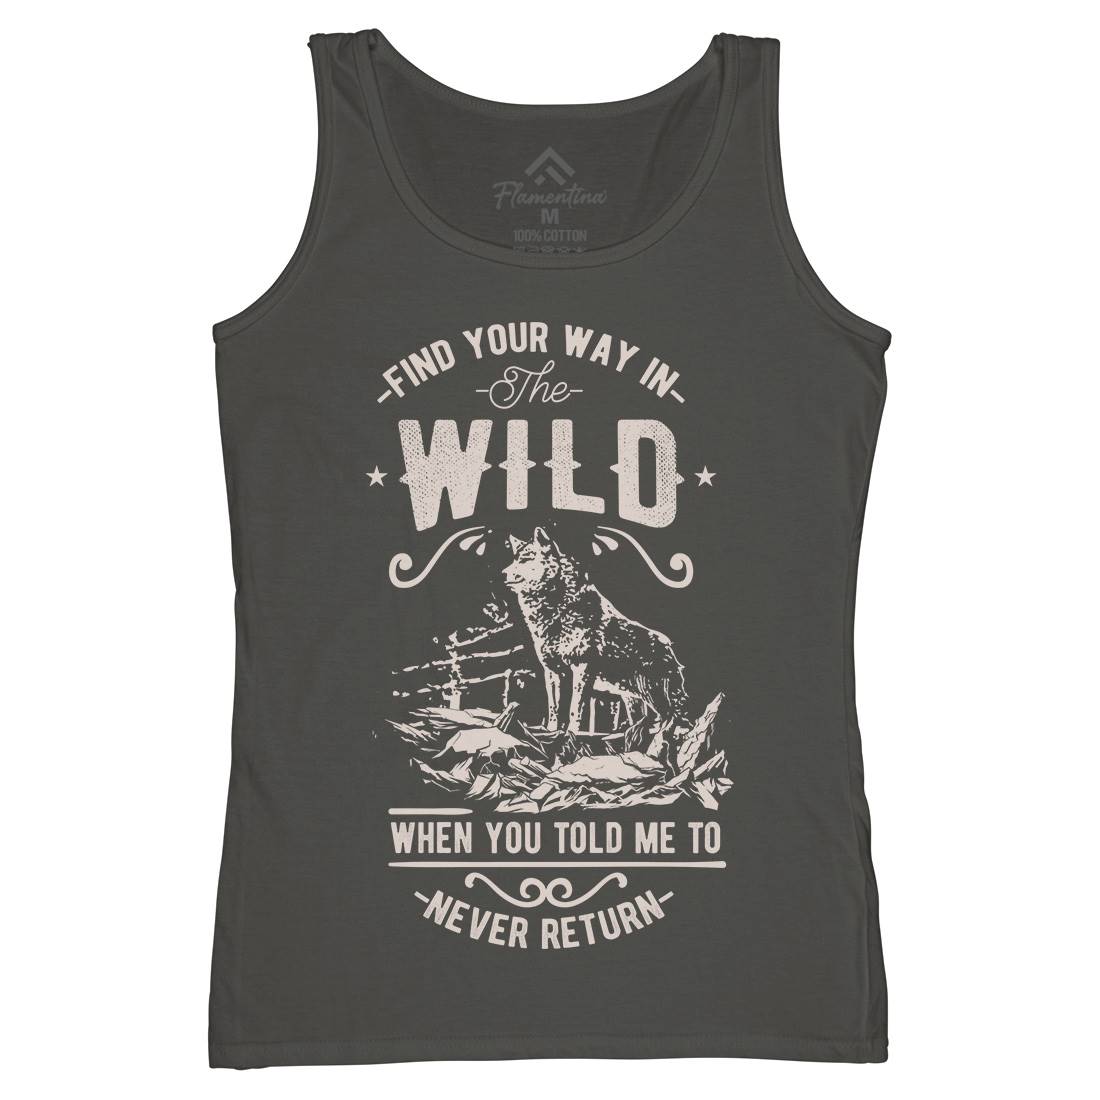 Find Your Way In The Wild Womens Organic Tank Top Vest Nature C932